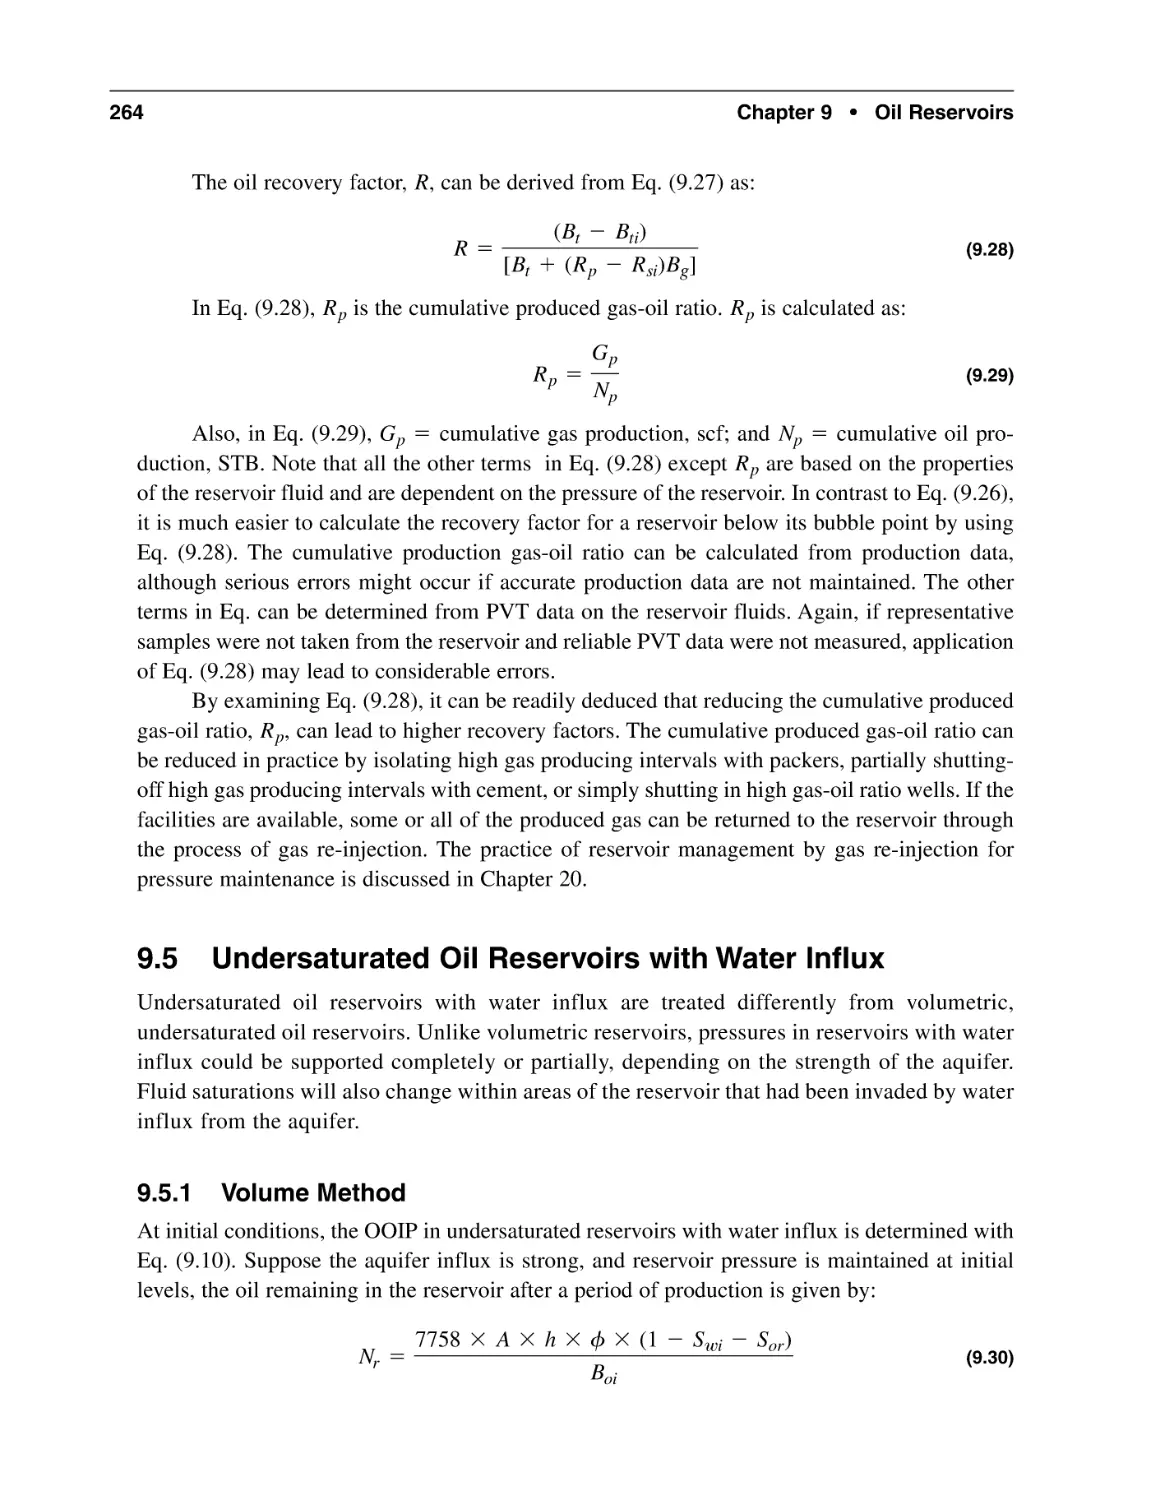 9.5 Undersaturated Oil Reservoirs with Water Influx
9.5.1 Volume Method